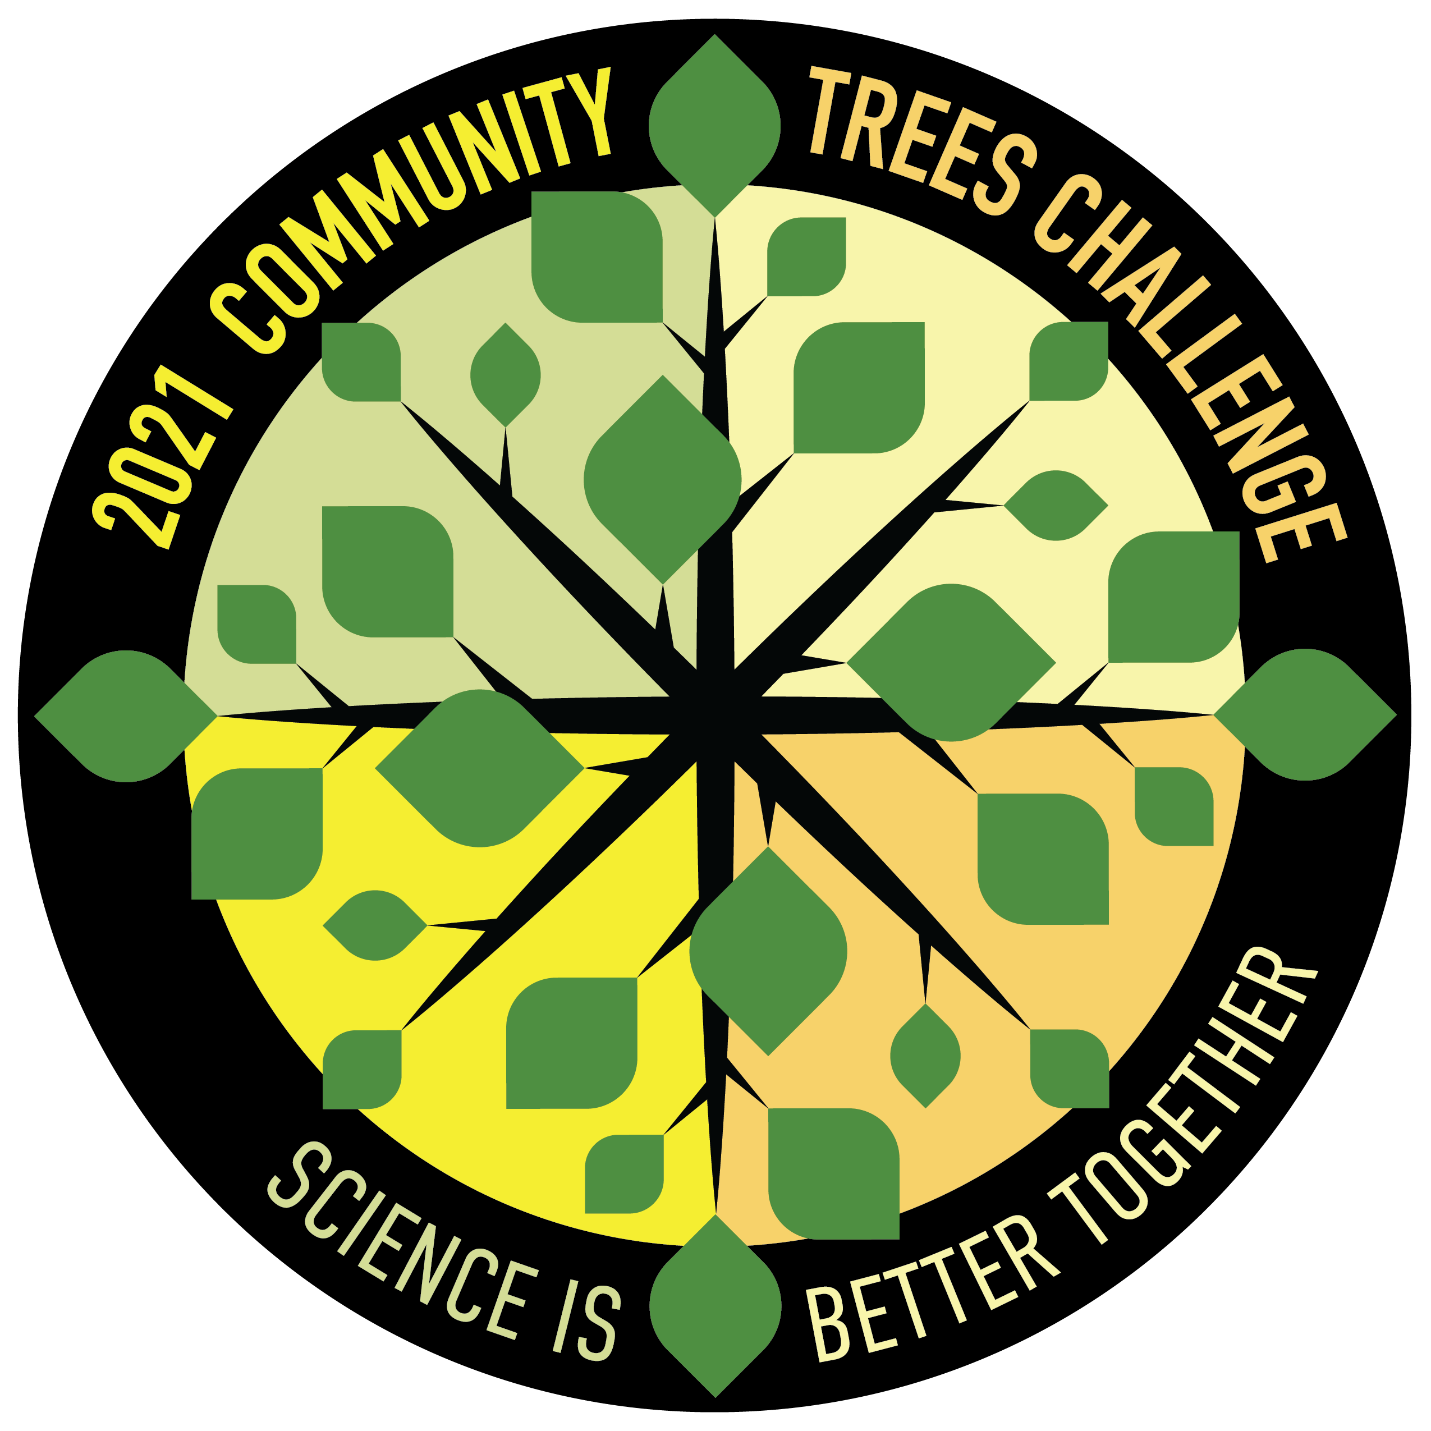 The 2021 Community Trees Challenge sharable